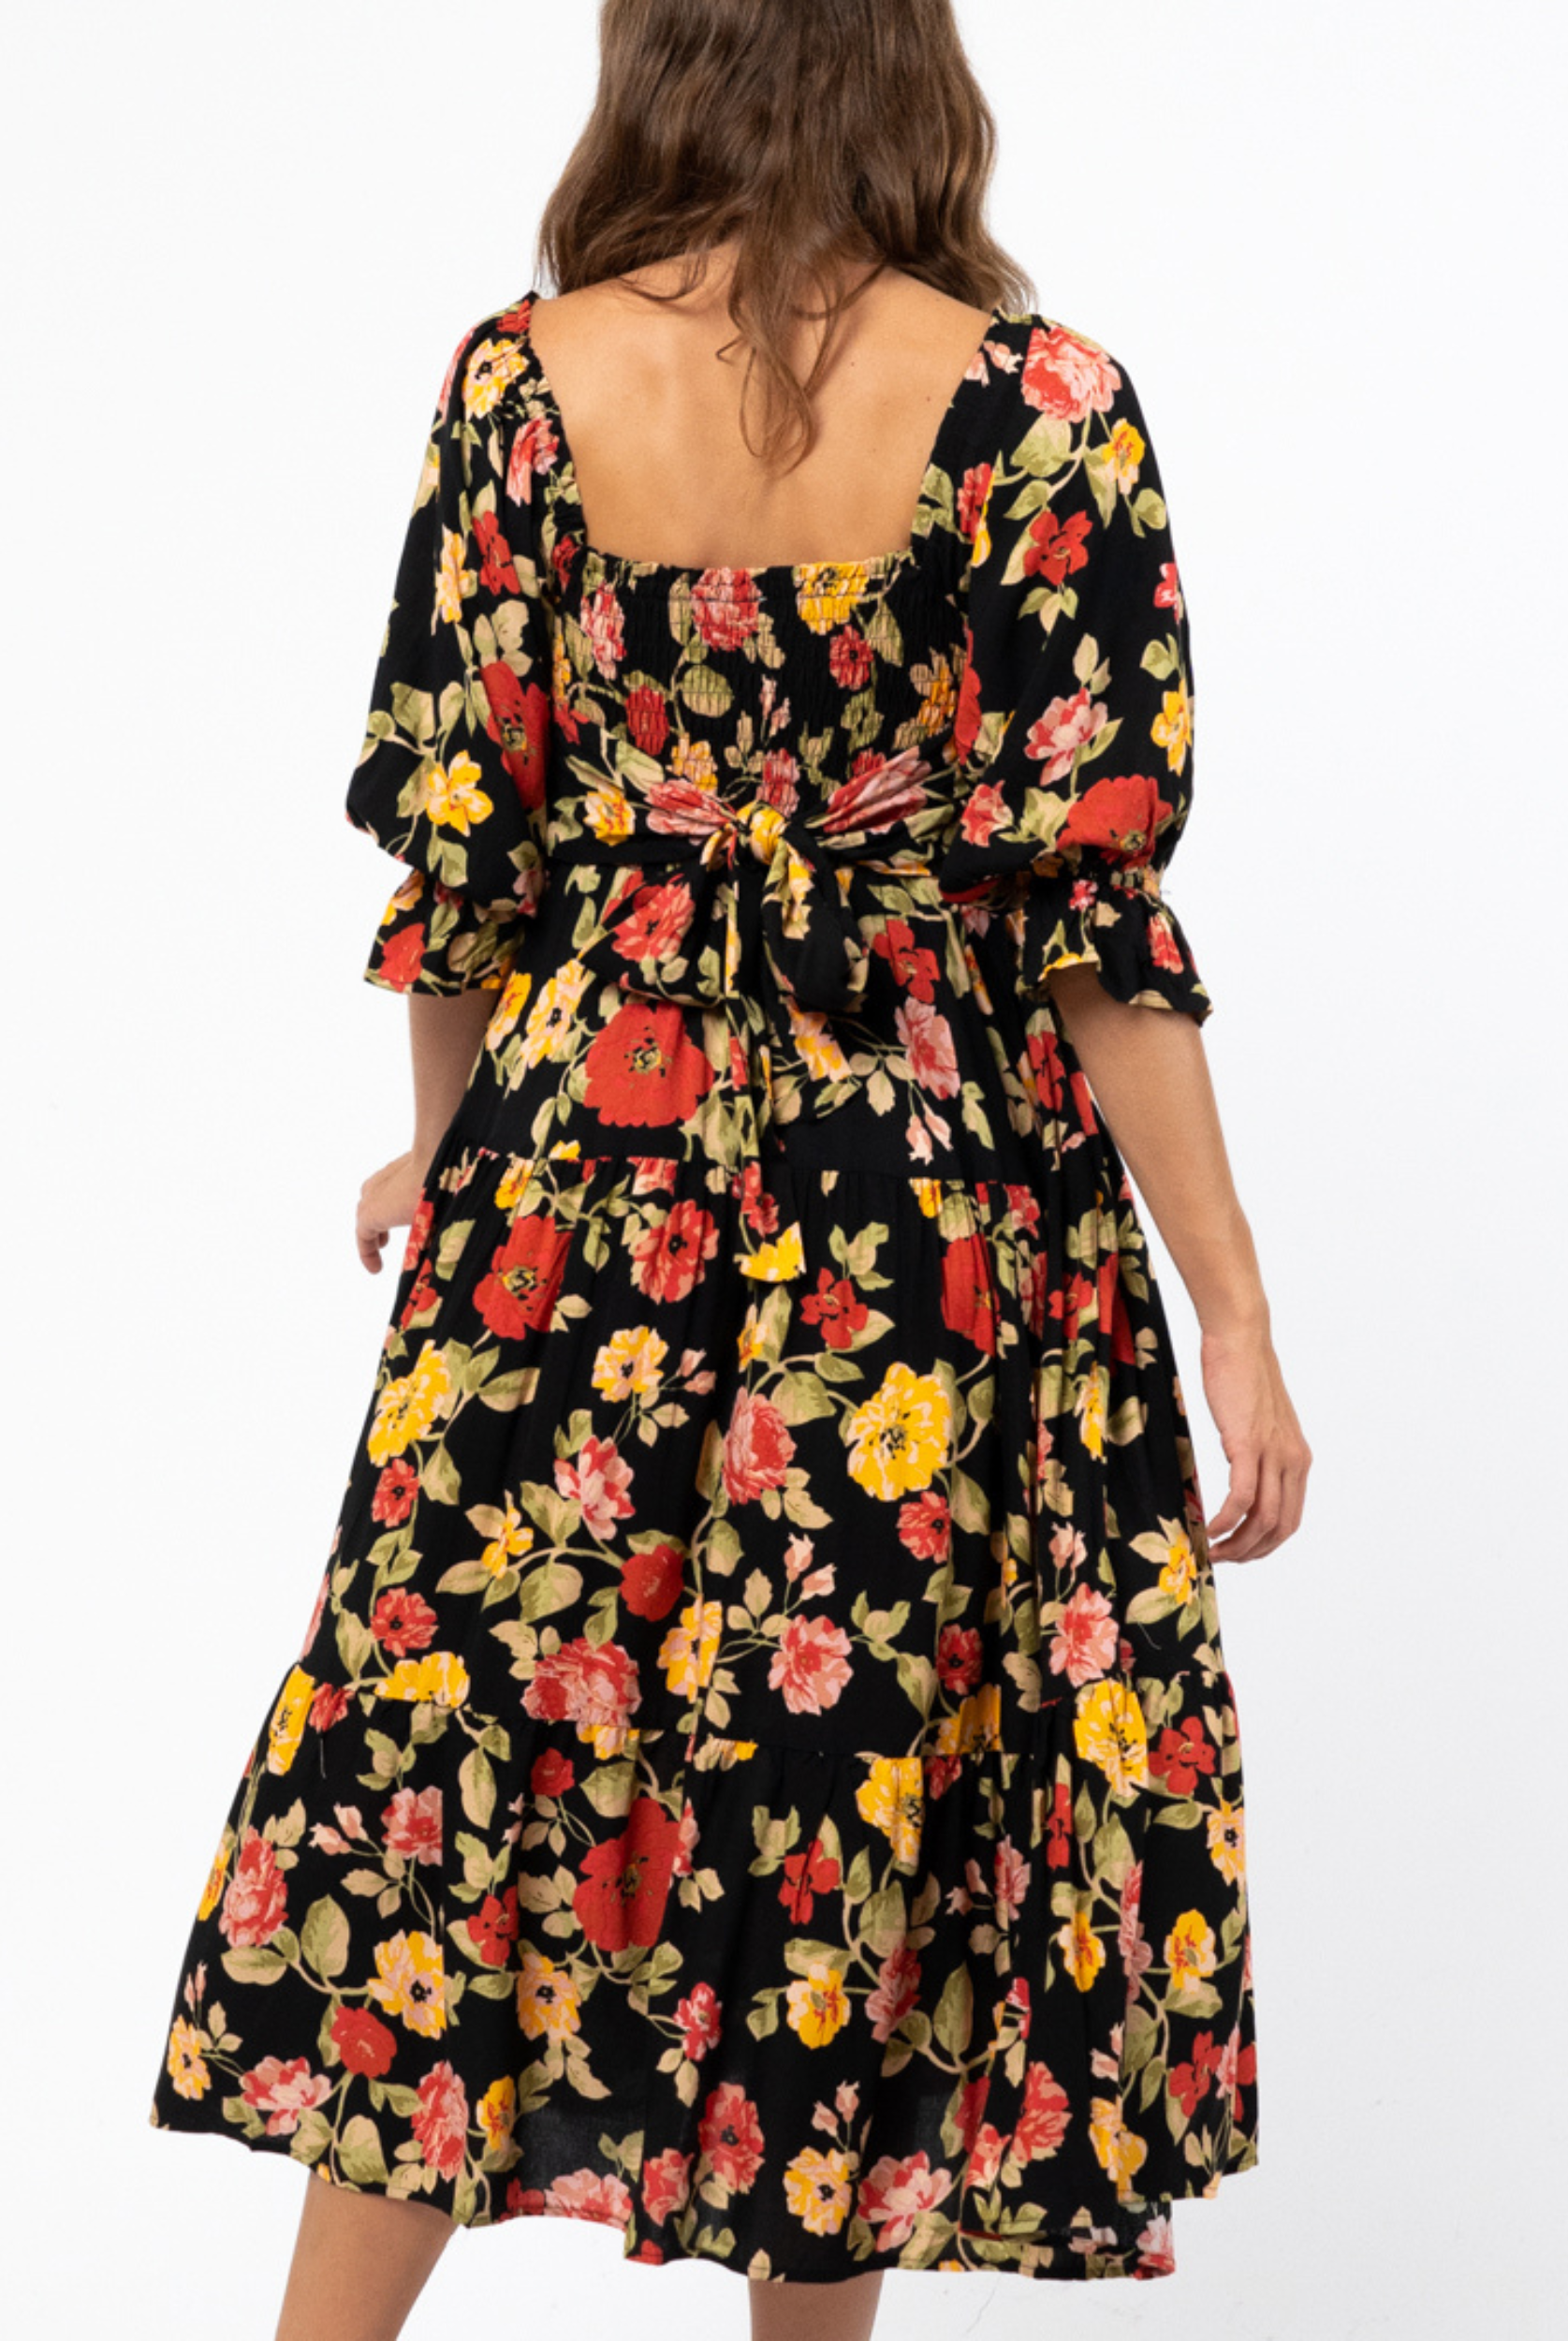 Winter Floral Printed Midi Dress with shirred bust from Australian Fashion Brand Ebby and I